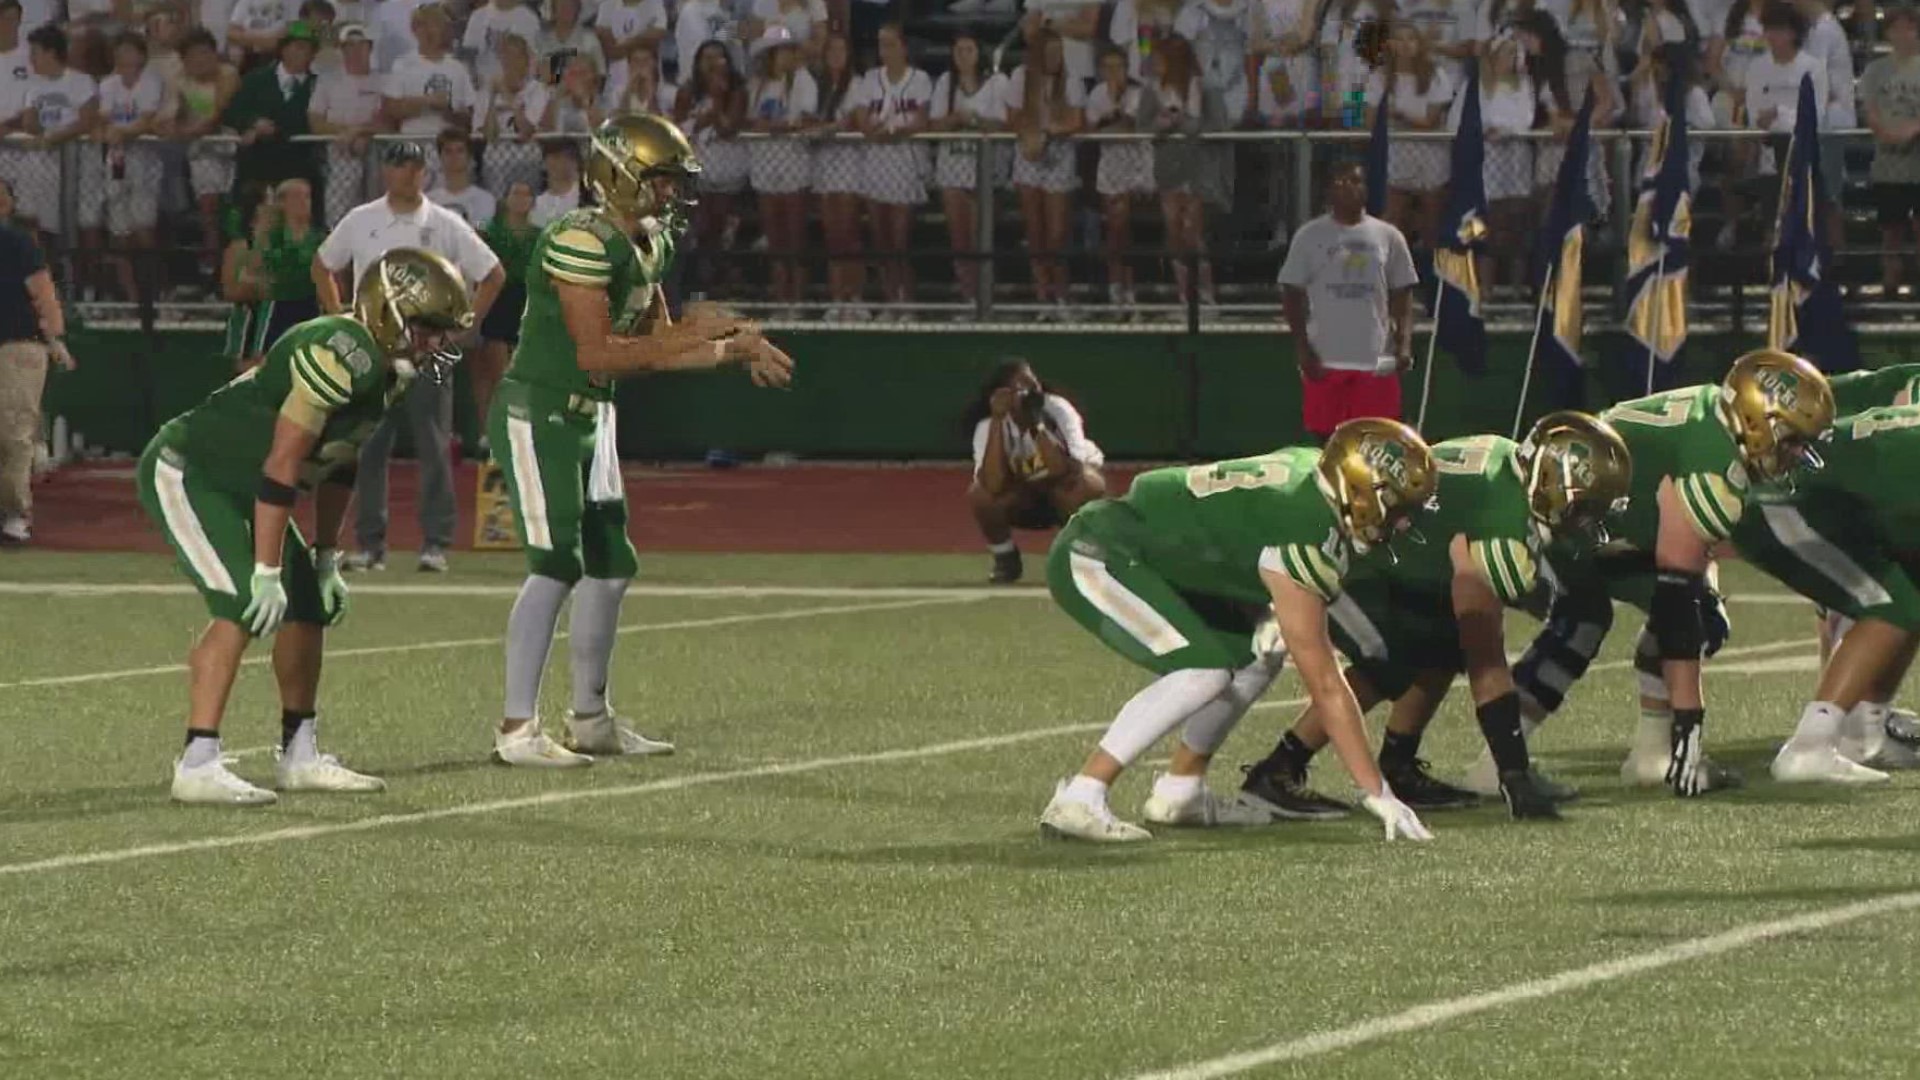 The Shamrocks fell to Cathedral at home Friday night on Operation Football.